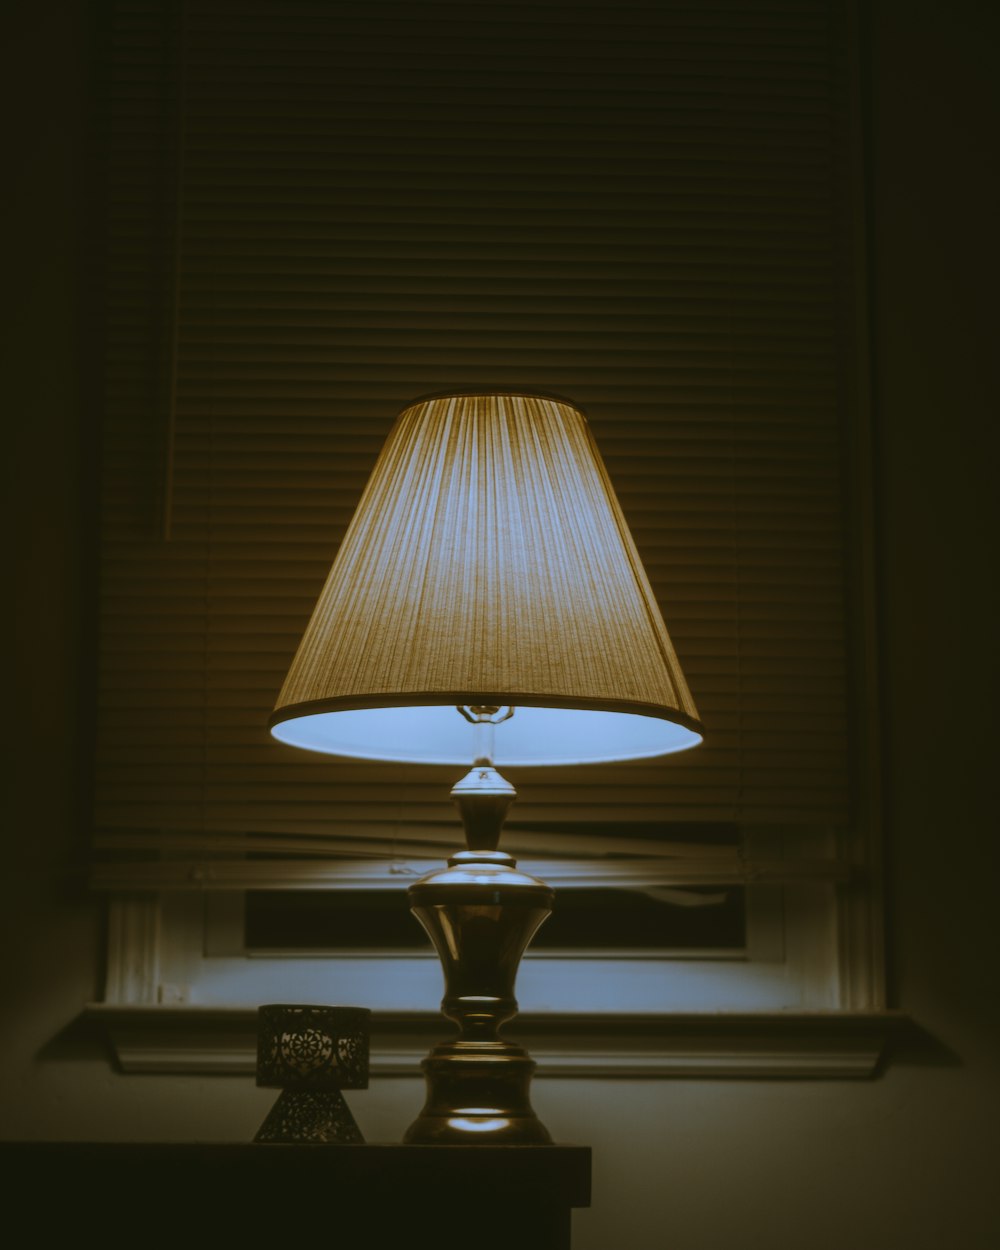 brown table lamp on brown wooden table